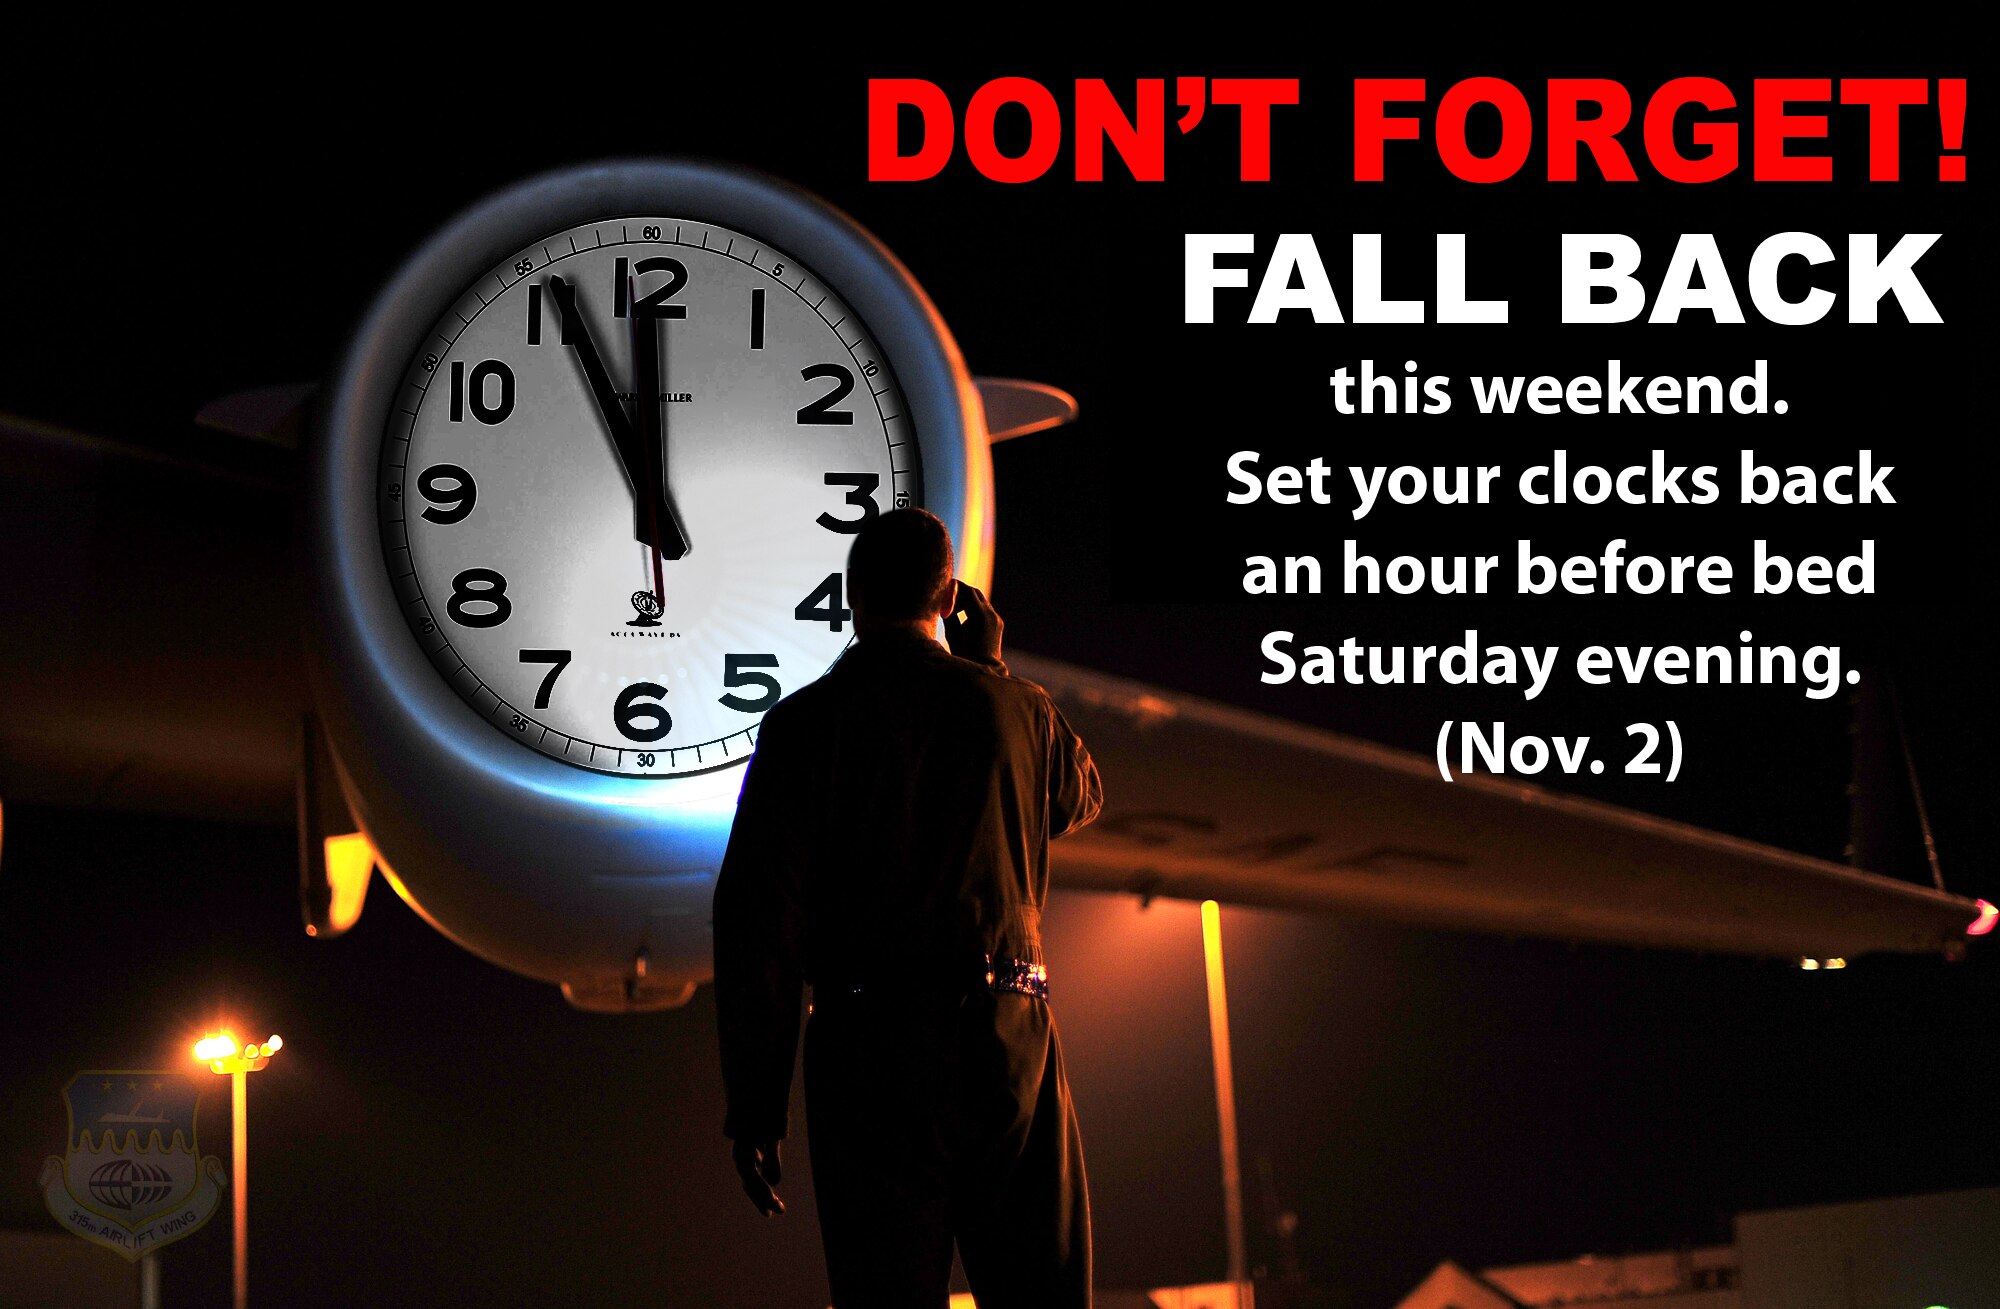 Remember to set your clocks back one hour this weekend as we switch to Eastern Standard Time Sunday, Nov. 3 at 2 a.m. (U.S. Air Force Reserve graphic by Michael Dukes)